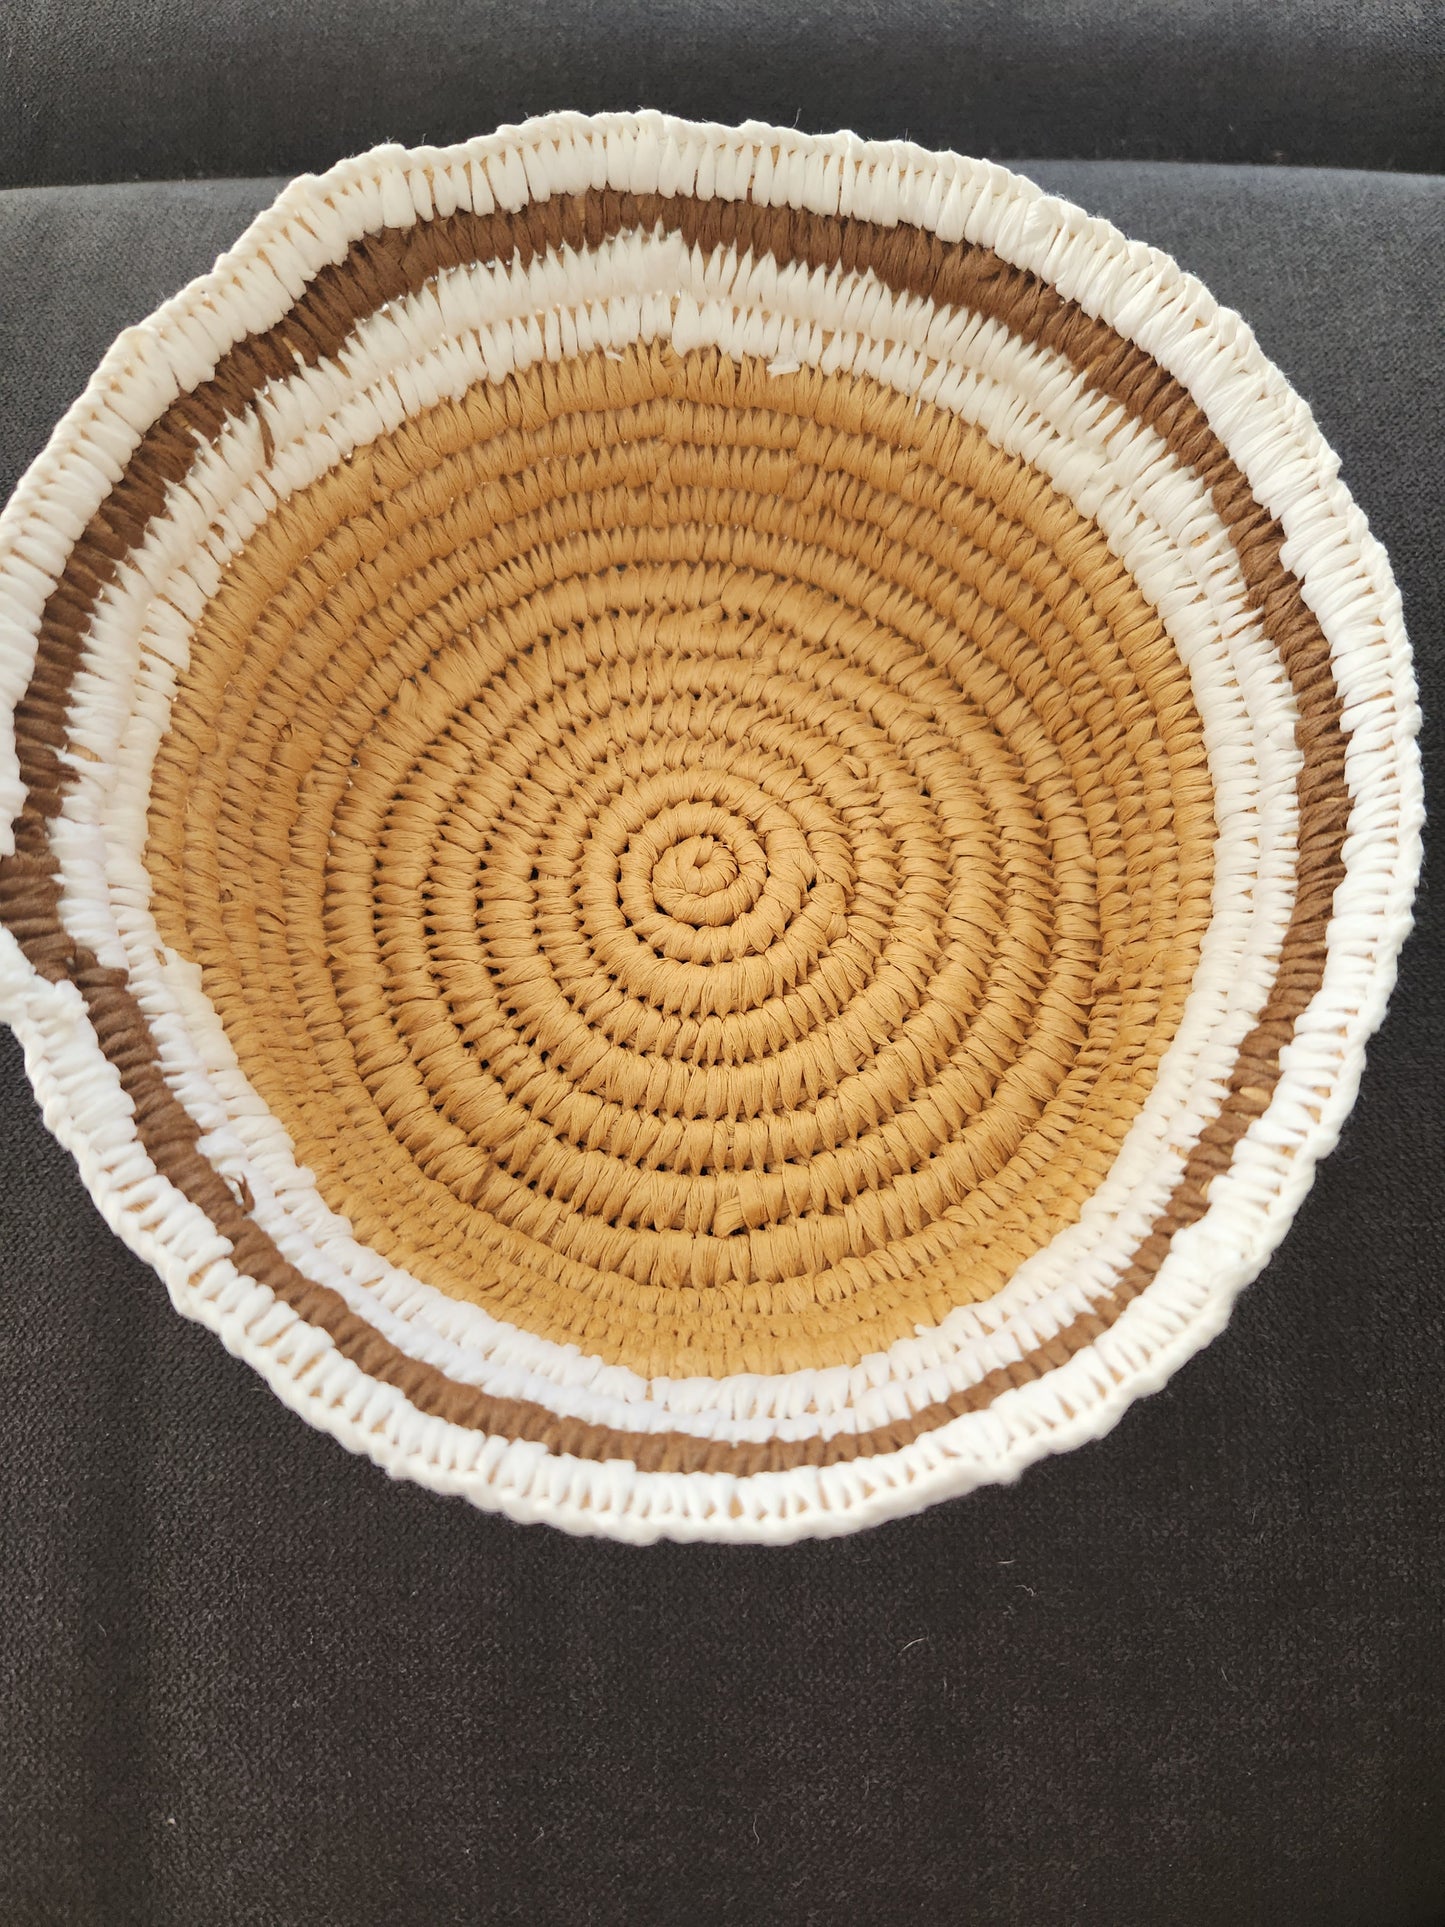 White and brown handwoven basket